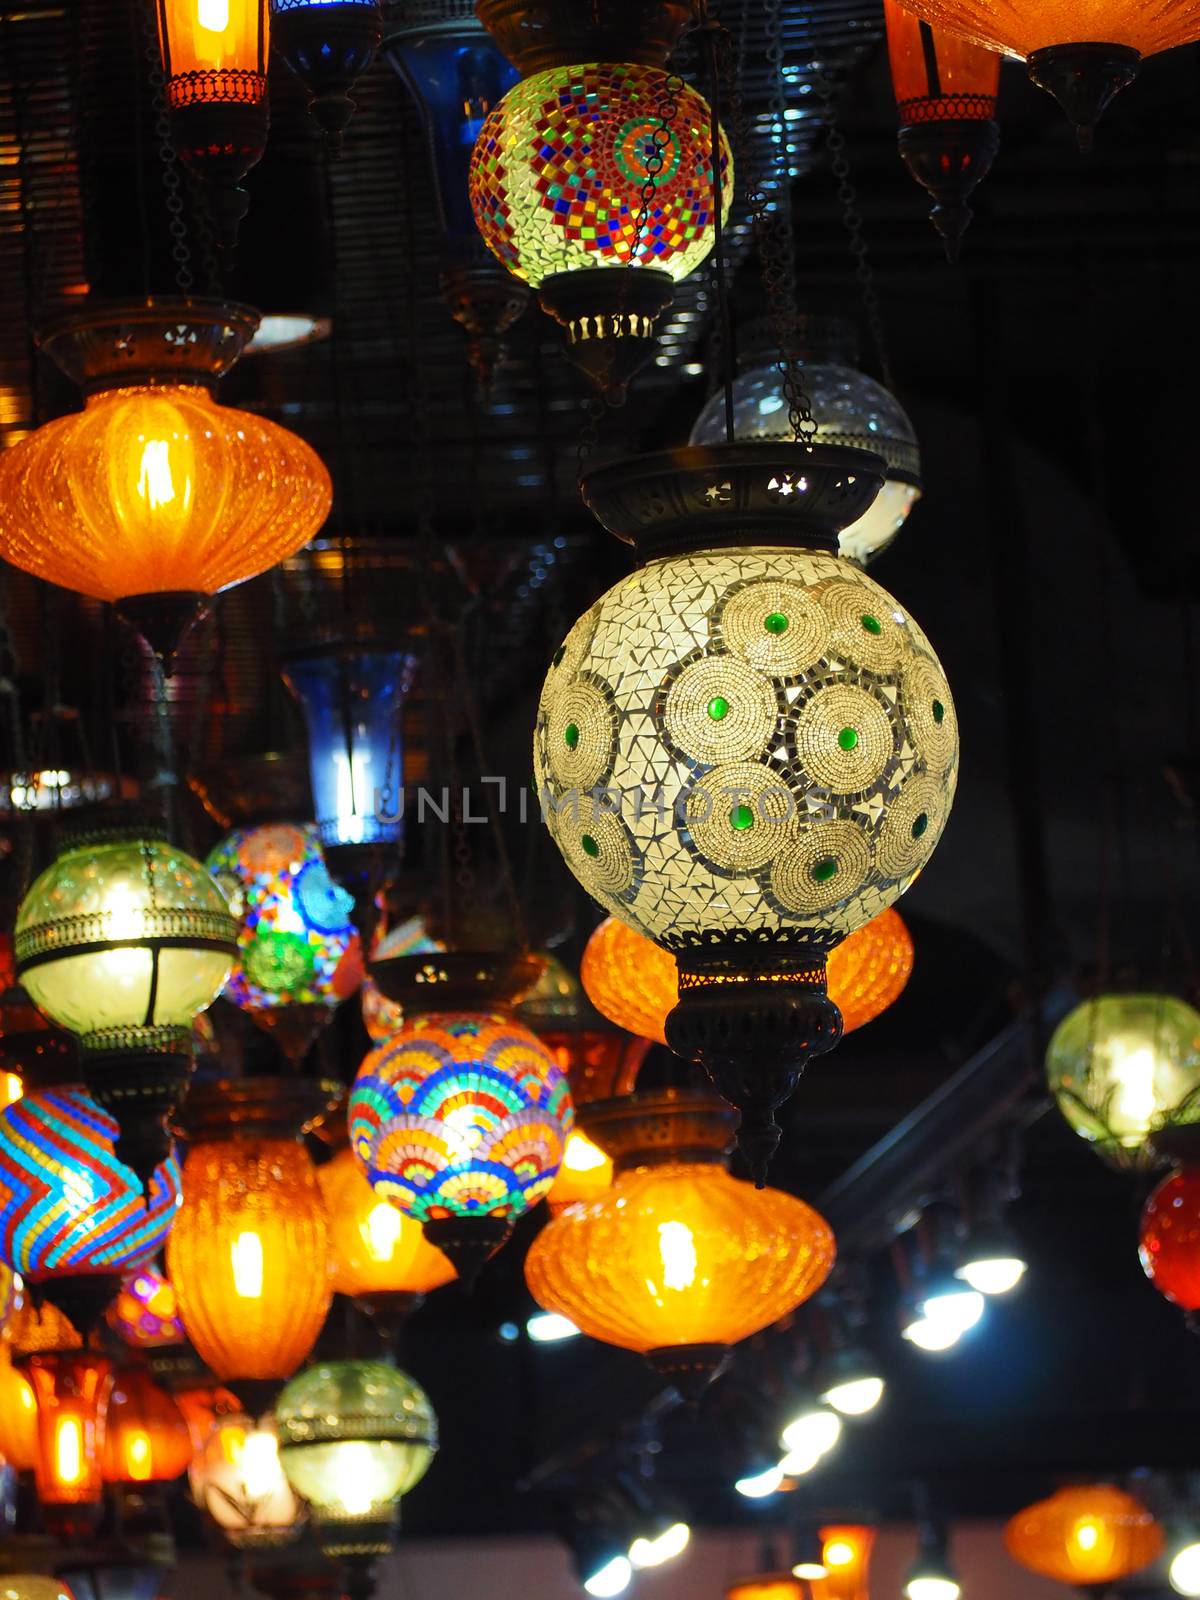 Ceiling light lamp traditional asia style. by gnepphoto